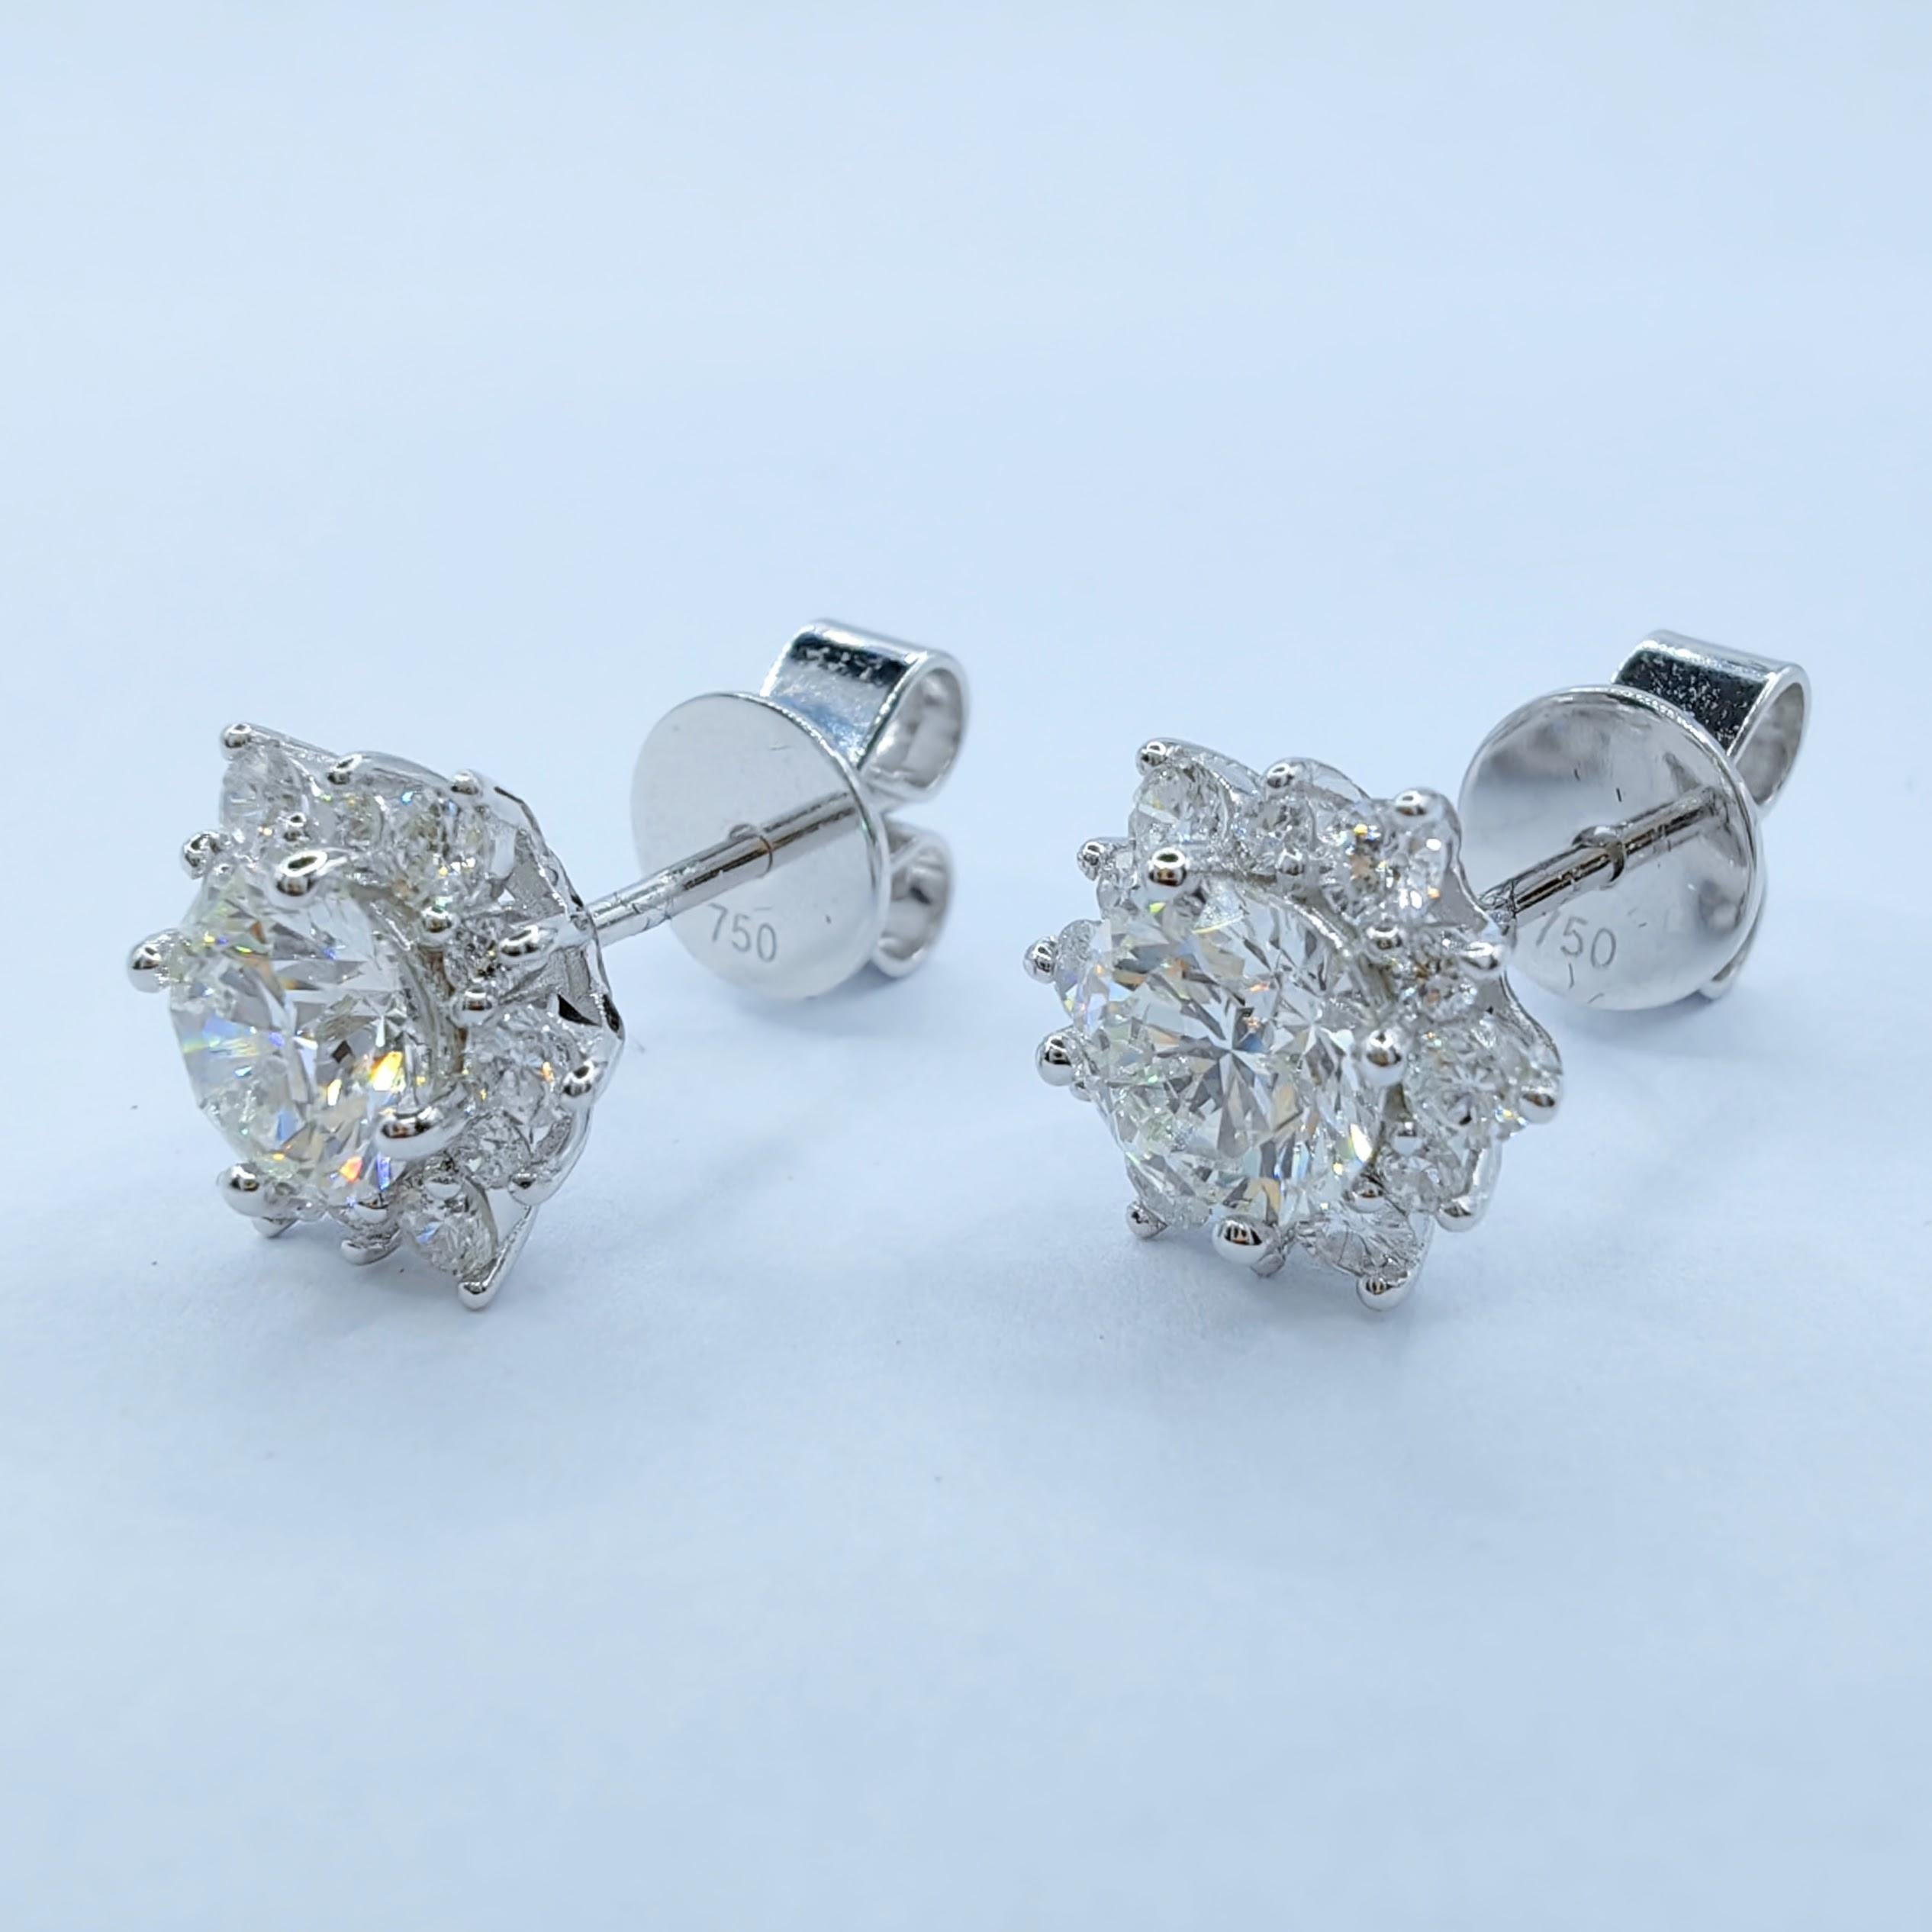 Introducing our unique and customizable Create Your Own Snowflake Flower Diamond Stud Earrings. With these earrings, you have the freedom to personalize them according to your preferences, allowing you to create a truly one-of-a-kind piece that